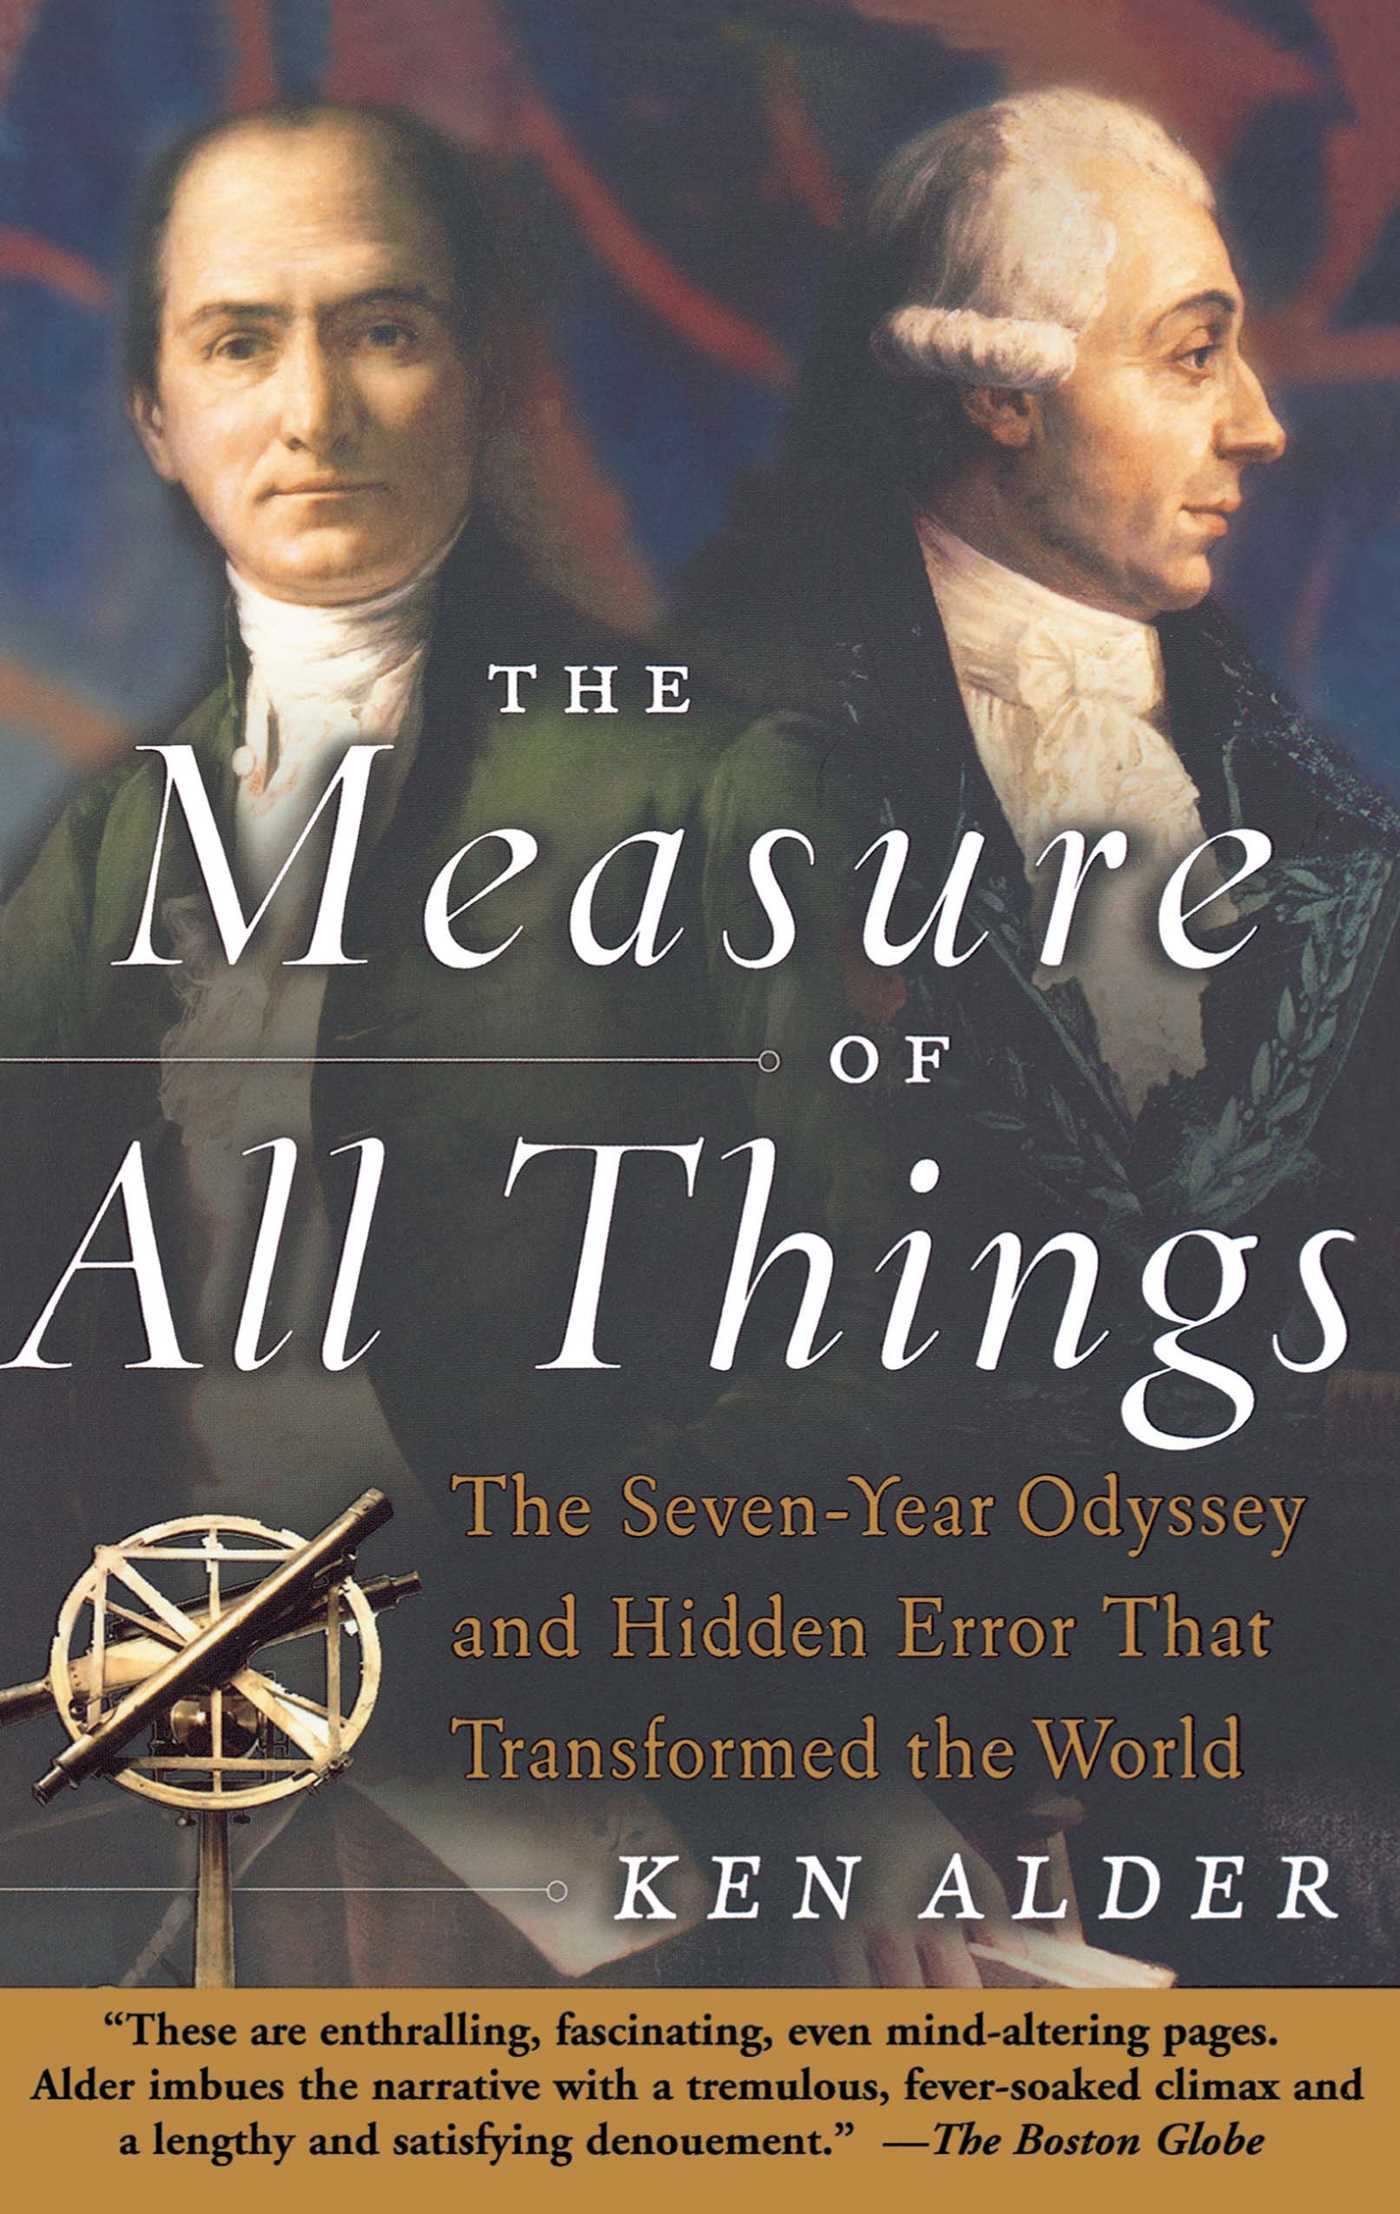 The Measure of All Things - 10-14.99